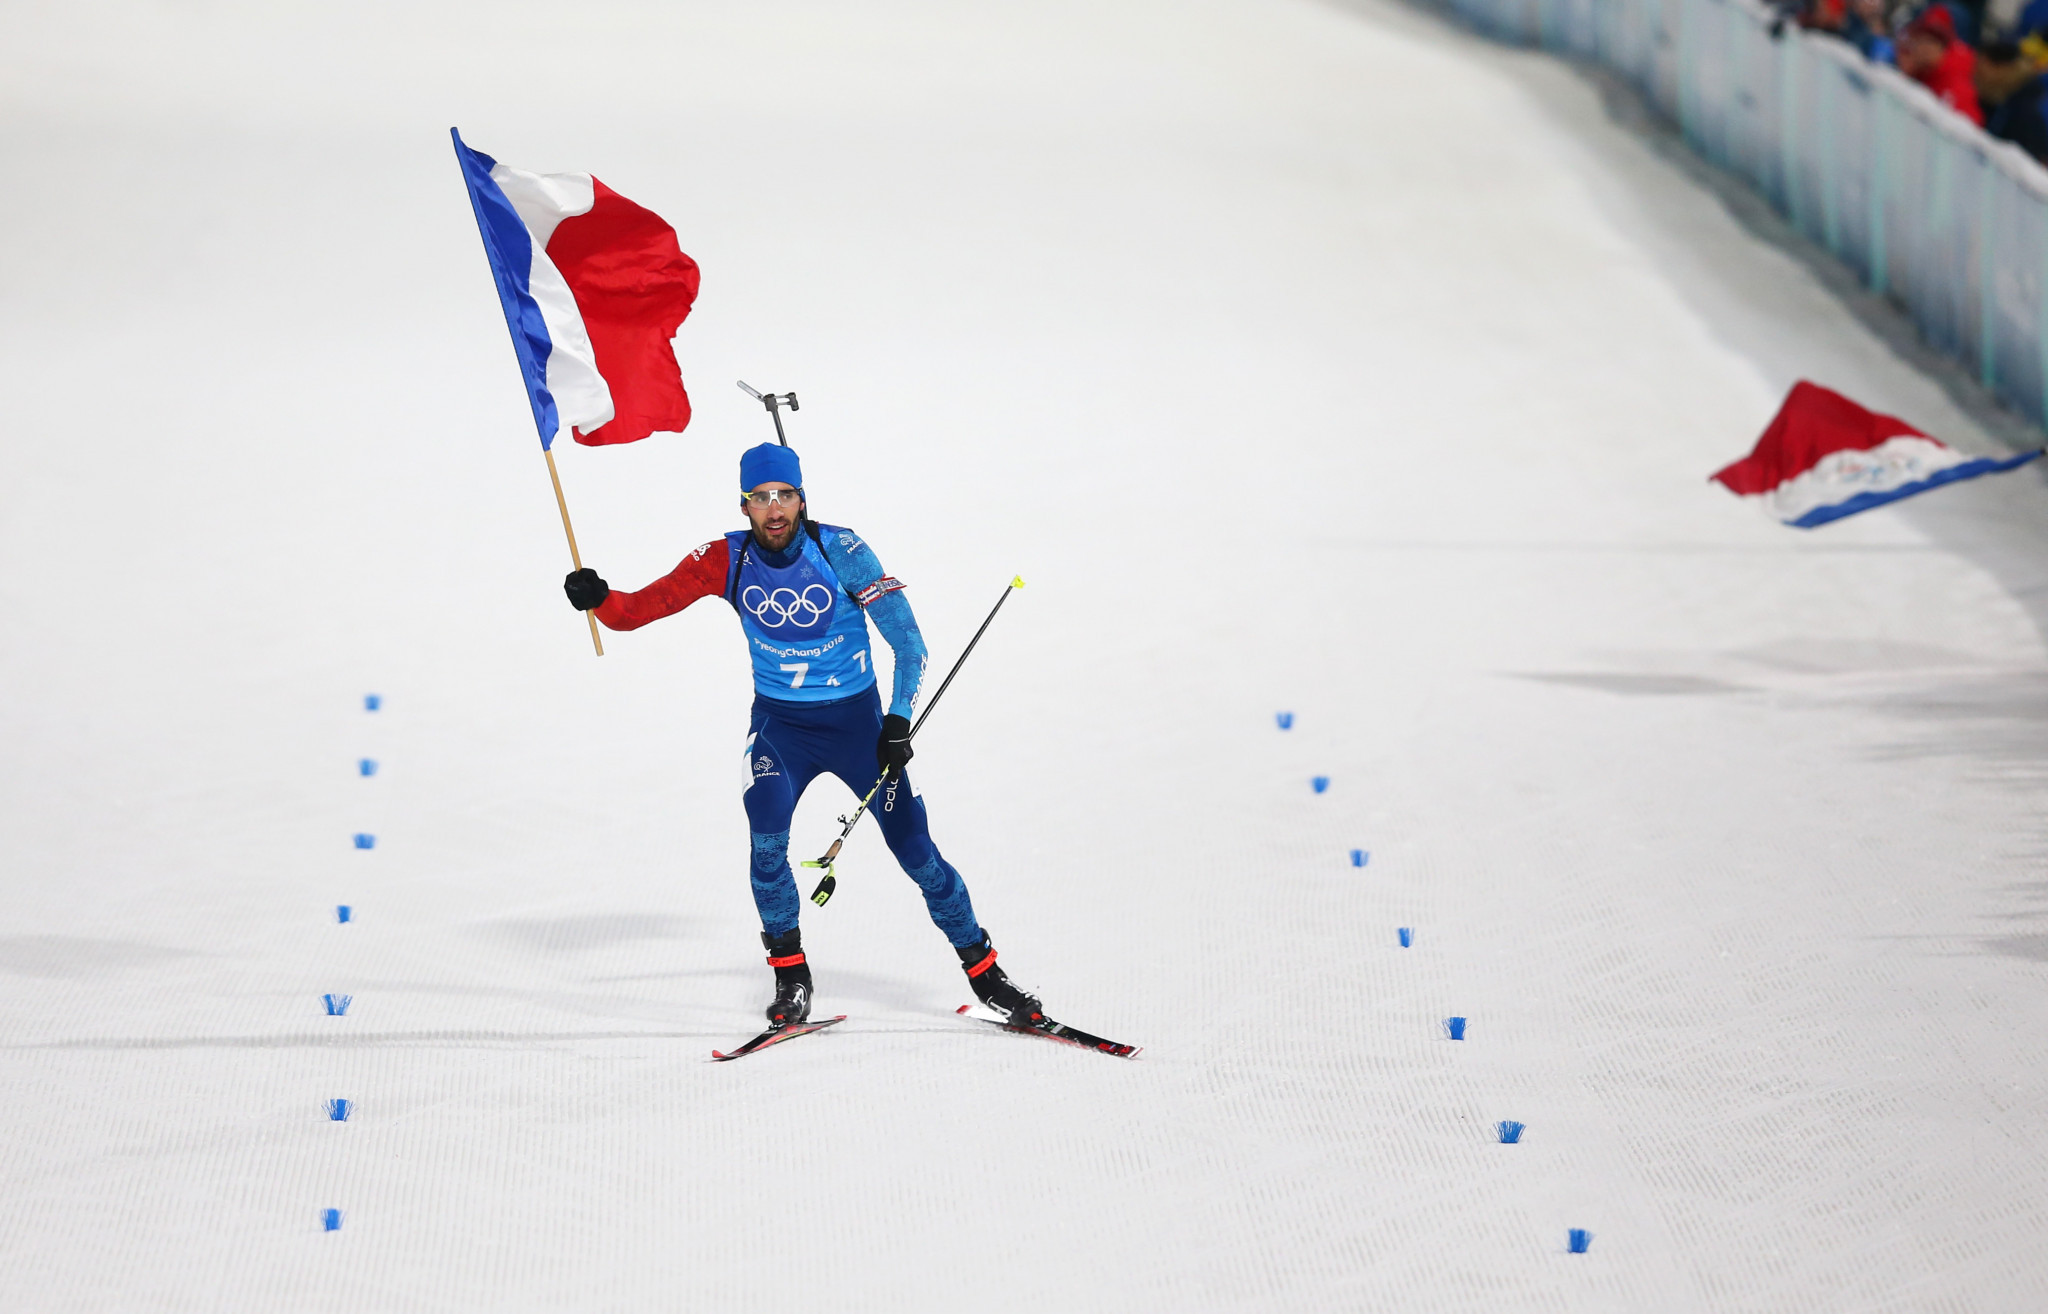 The French star secured his third title at Pyeongchang 2018 and fifth Olympic crown ©Getty Images